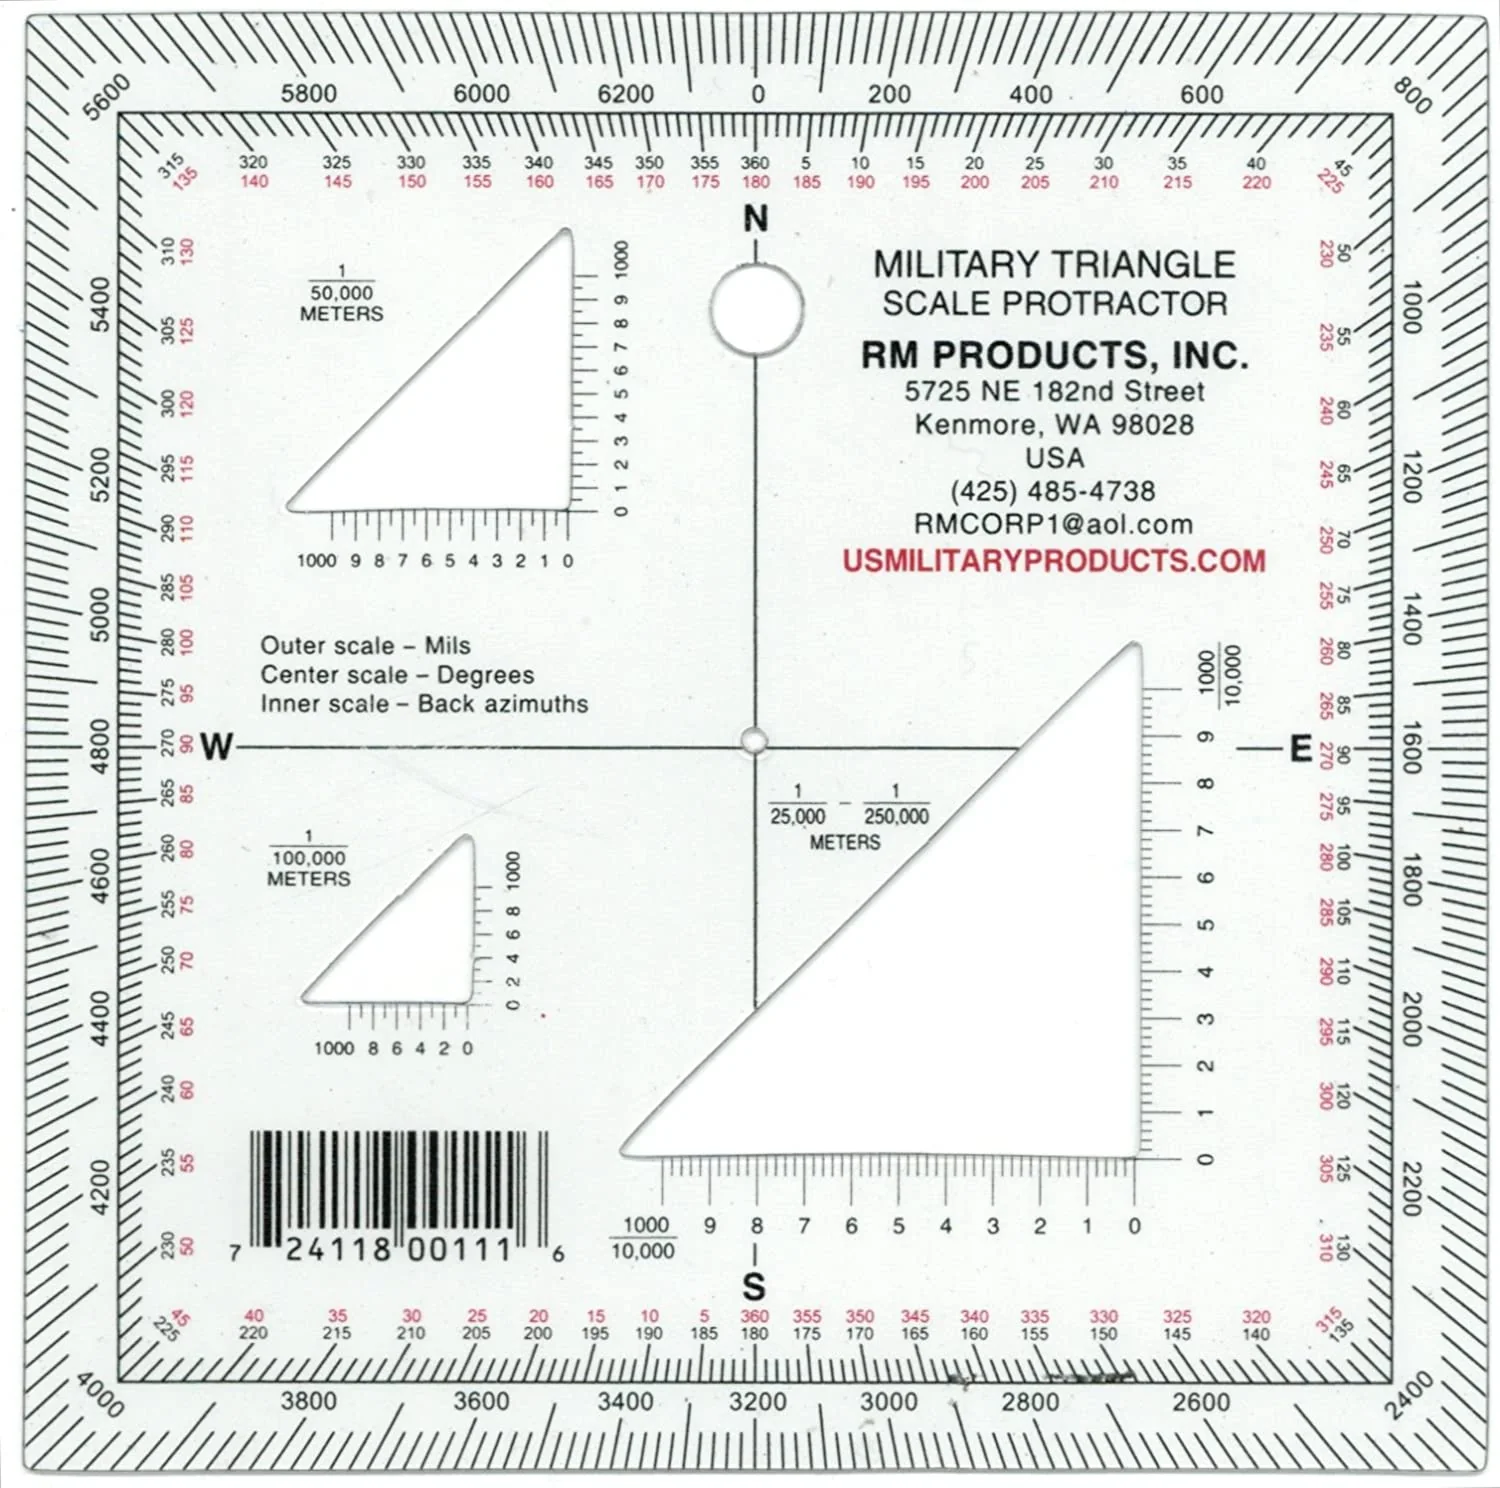 MapTools Product -- Round Military Coordinate Scale and Protractor